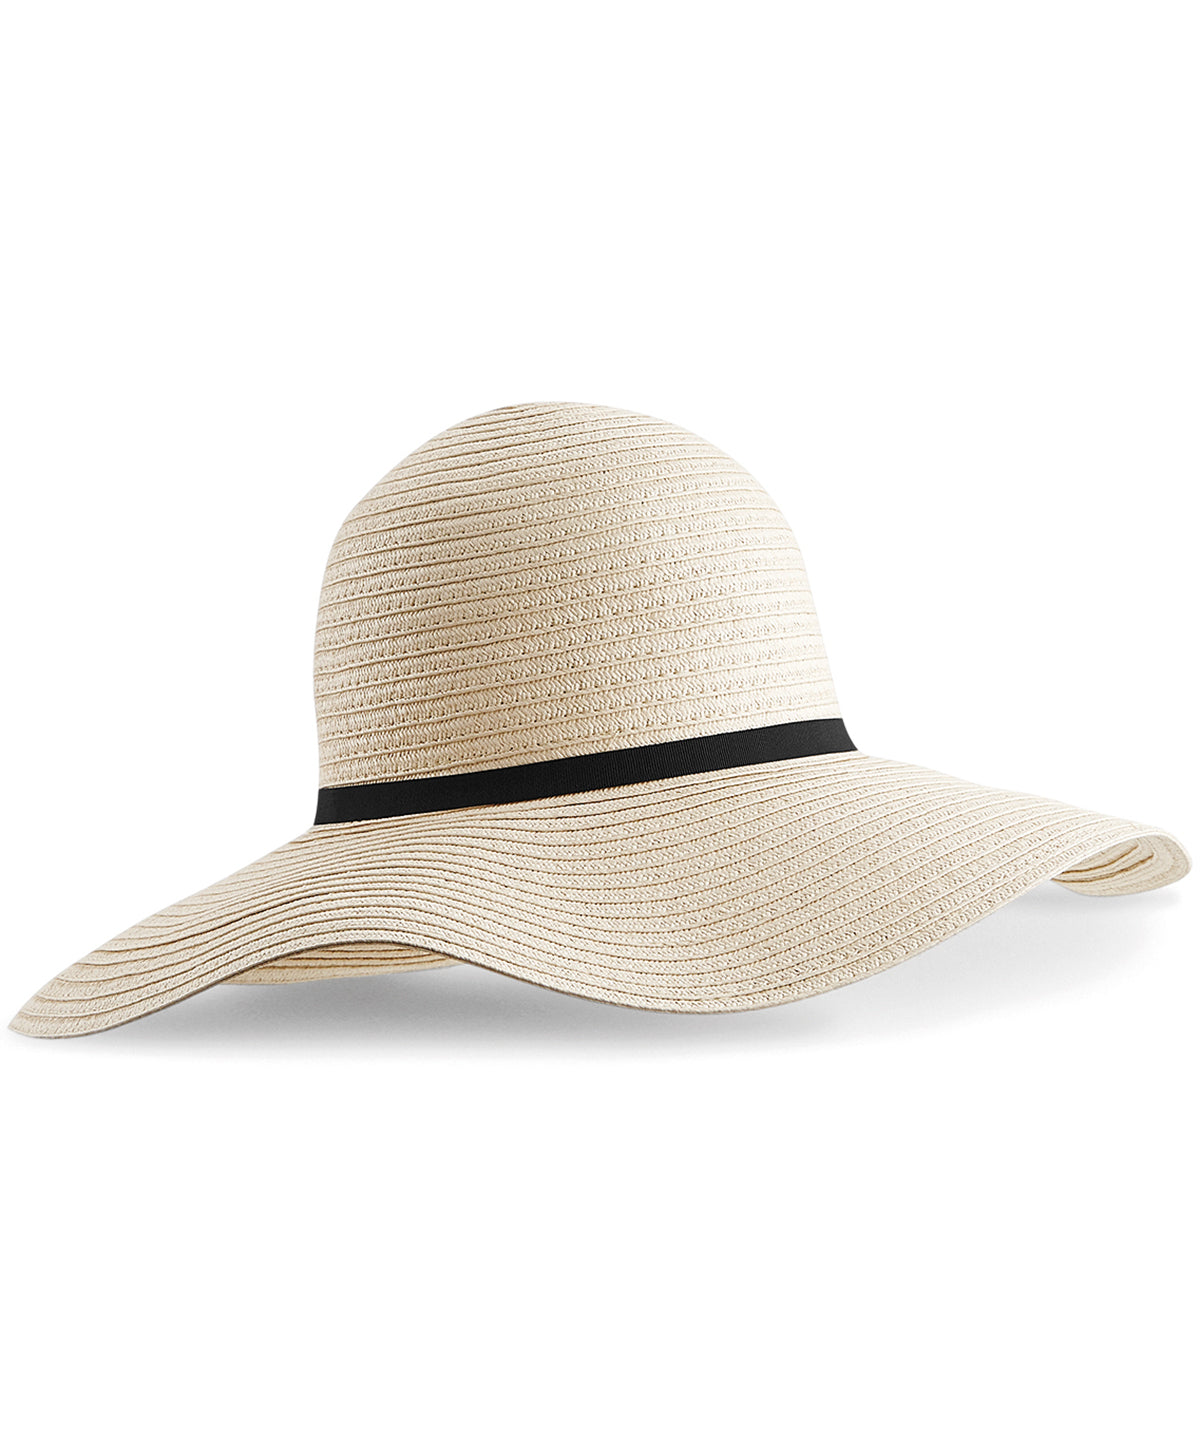 Personalised Hats - Natural Beechfield Marbella wide-brimmed sun hat